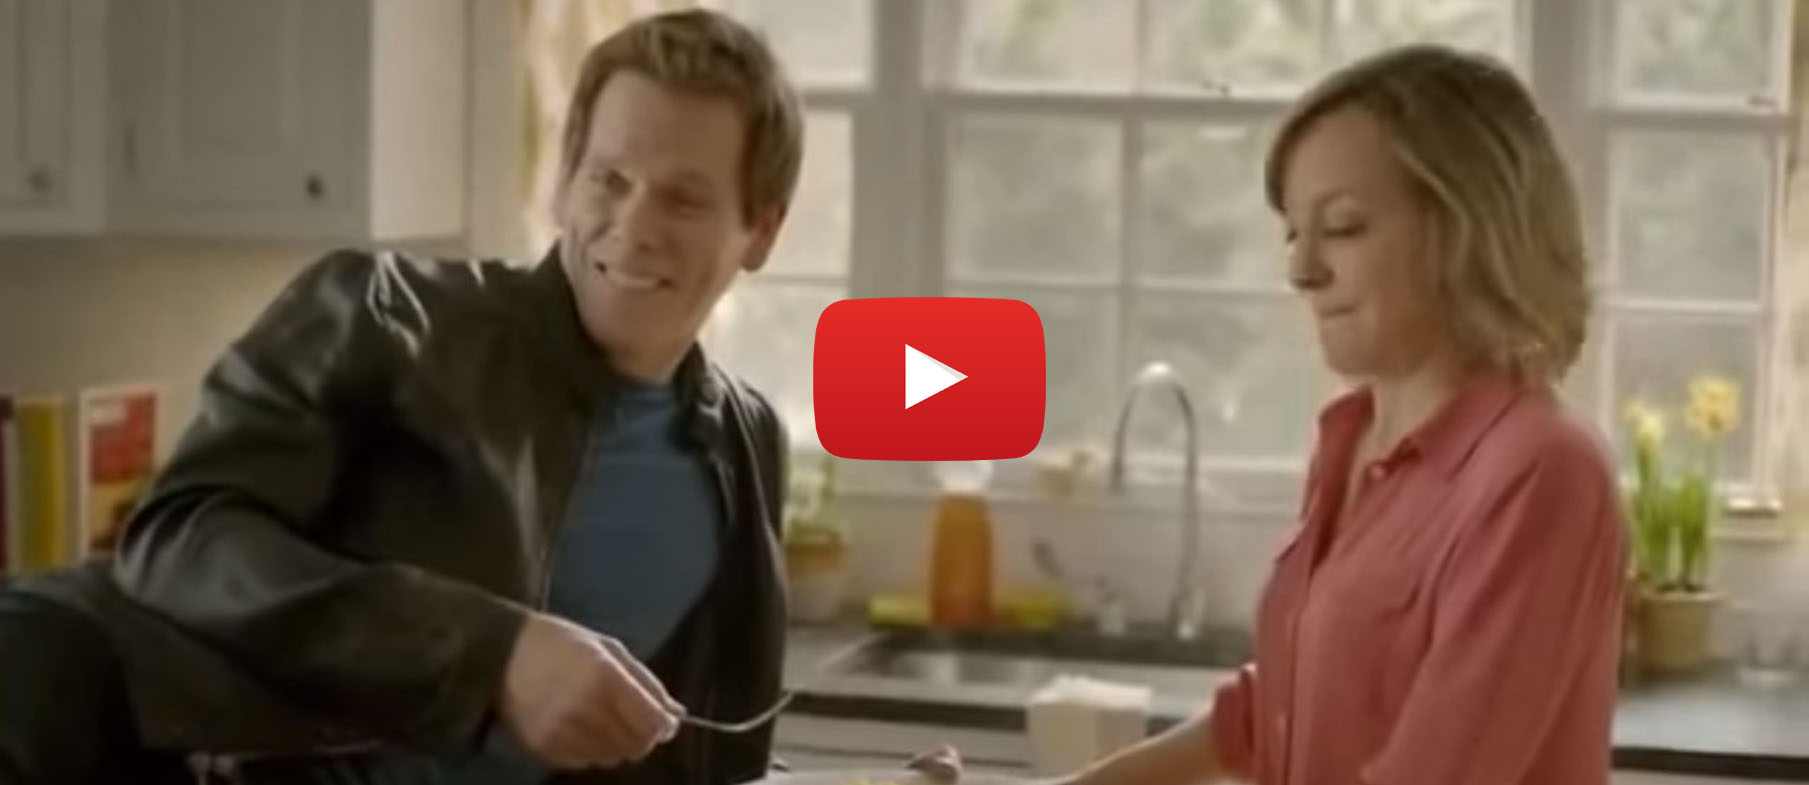 Kevin Bacon Adverts